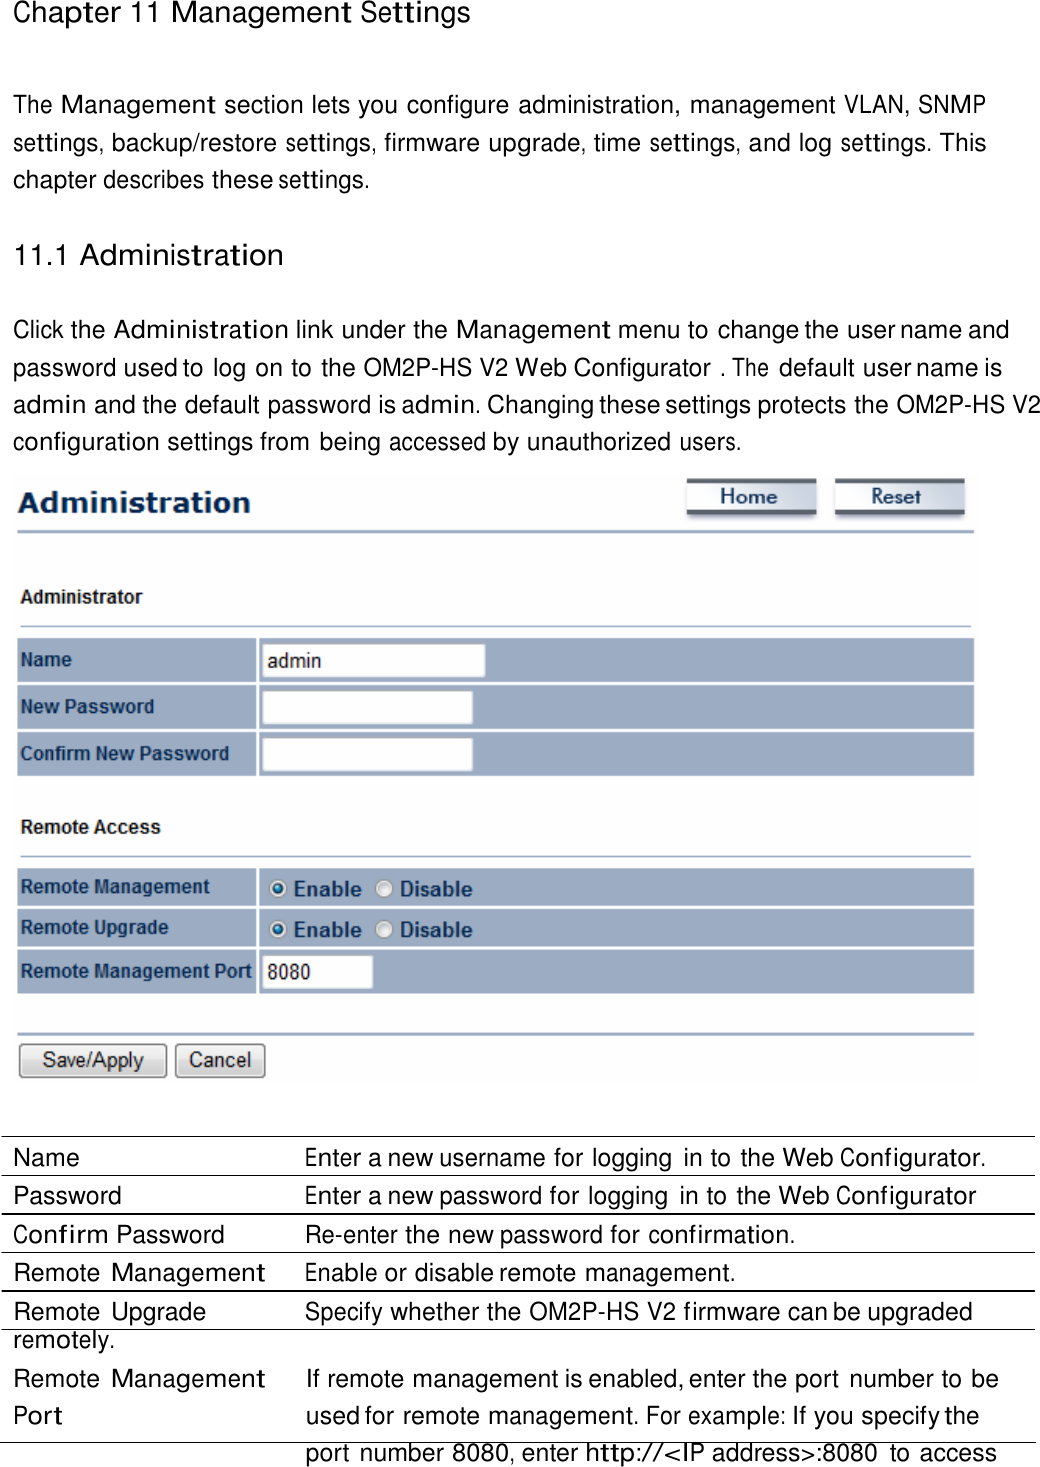 Chapter 11 Management Settings     The Management section lets you configure administration, management VLAN, SNMP settings, backup/restore settings, firmware upgrade, time settings, and log settings. This chapter describes these settings.   11.1 Administration   Click the Administration link under the Management menu to change the user name and password used to log on to the OM2P-HS V2 Web Configurator . The default user name is admin and the default password is admin. Changing these settings protects the OM2P-HS V2 configuration settings from being accessed by unauthorized users.     Name  Enter a new username for logging  in to the Web Configurator. Password  Enter a new password for logging  in to the Web Configurator Confirm Password  Re-enter the new password for confirmation. Remote Management Enable or disable remote management. Remote Upgrade  Specify whether the OM2P-HS V2 firmware can be upgraded remotely. Remote Management Port If remote management is enabled, enter the port number to be used for remote management. For example: If you specify the port number 8080, enter http://&lt;IP address&gt;:8080  to access 